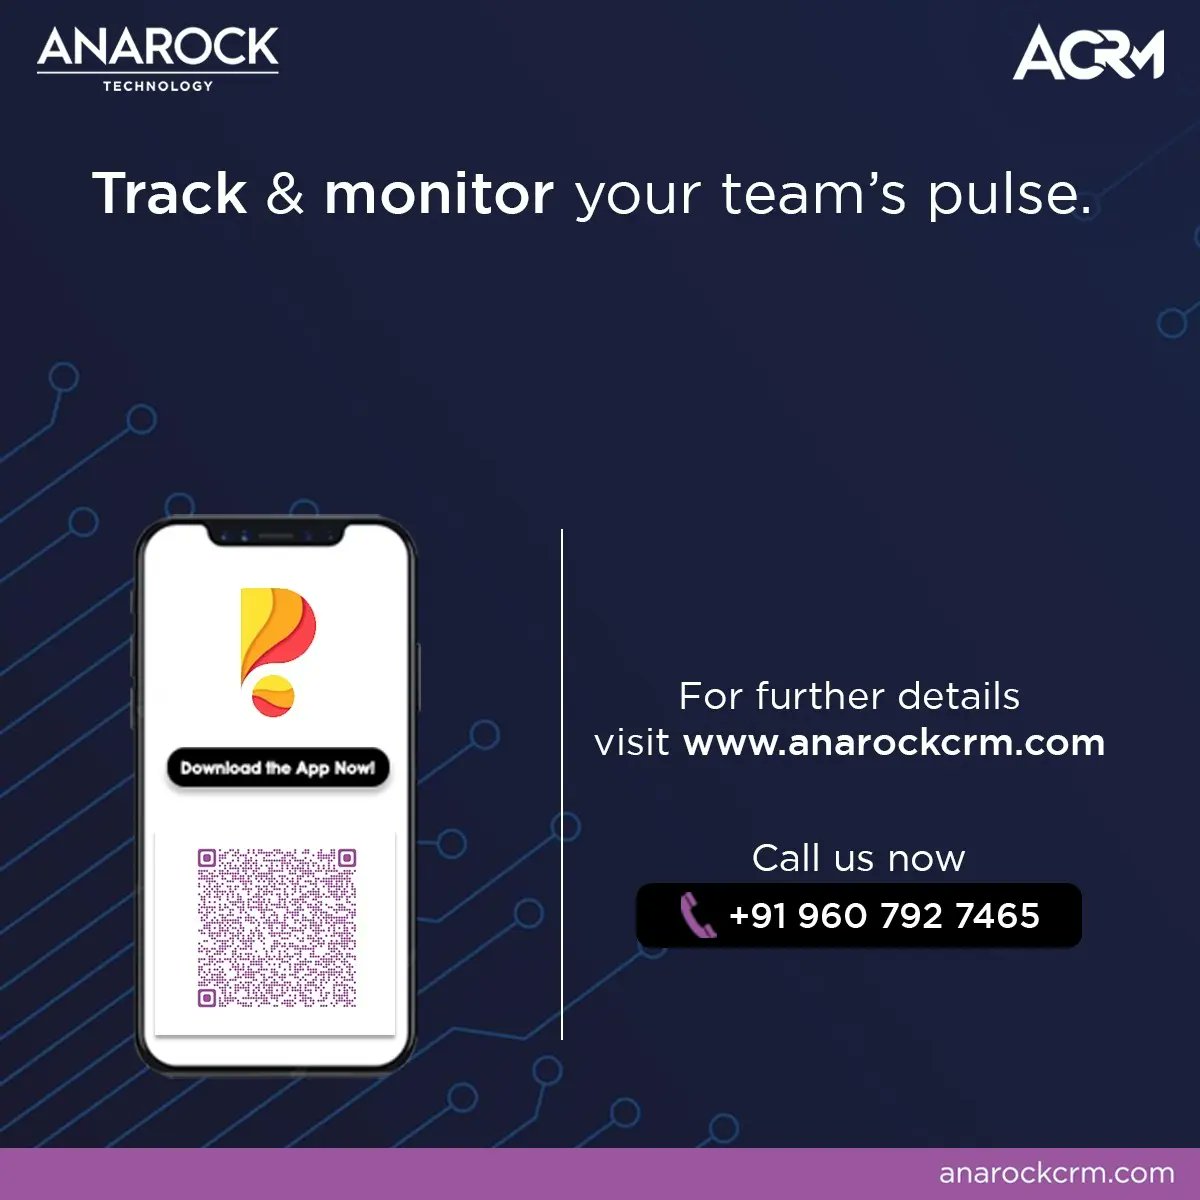 Optimize conversions by effectively monitoring your team's performance with the ACRM Pulse App. Get timely alerts on the go! #PulseApp #CRM #technology #crmsoftware #customerrelationshipmanagement #revenue #saas #anarock #anarockcrm #crmbyanarock #realestate #indianrealestate